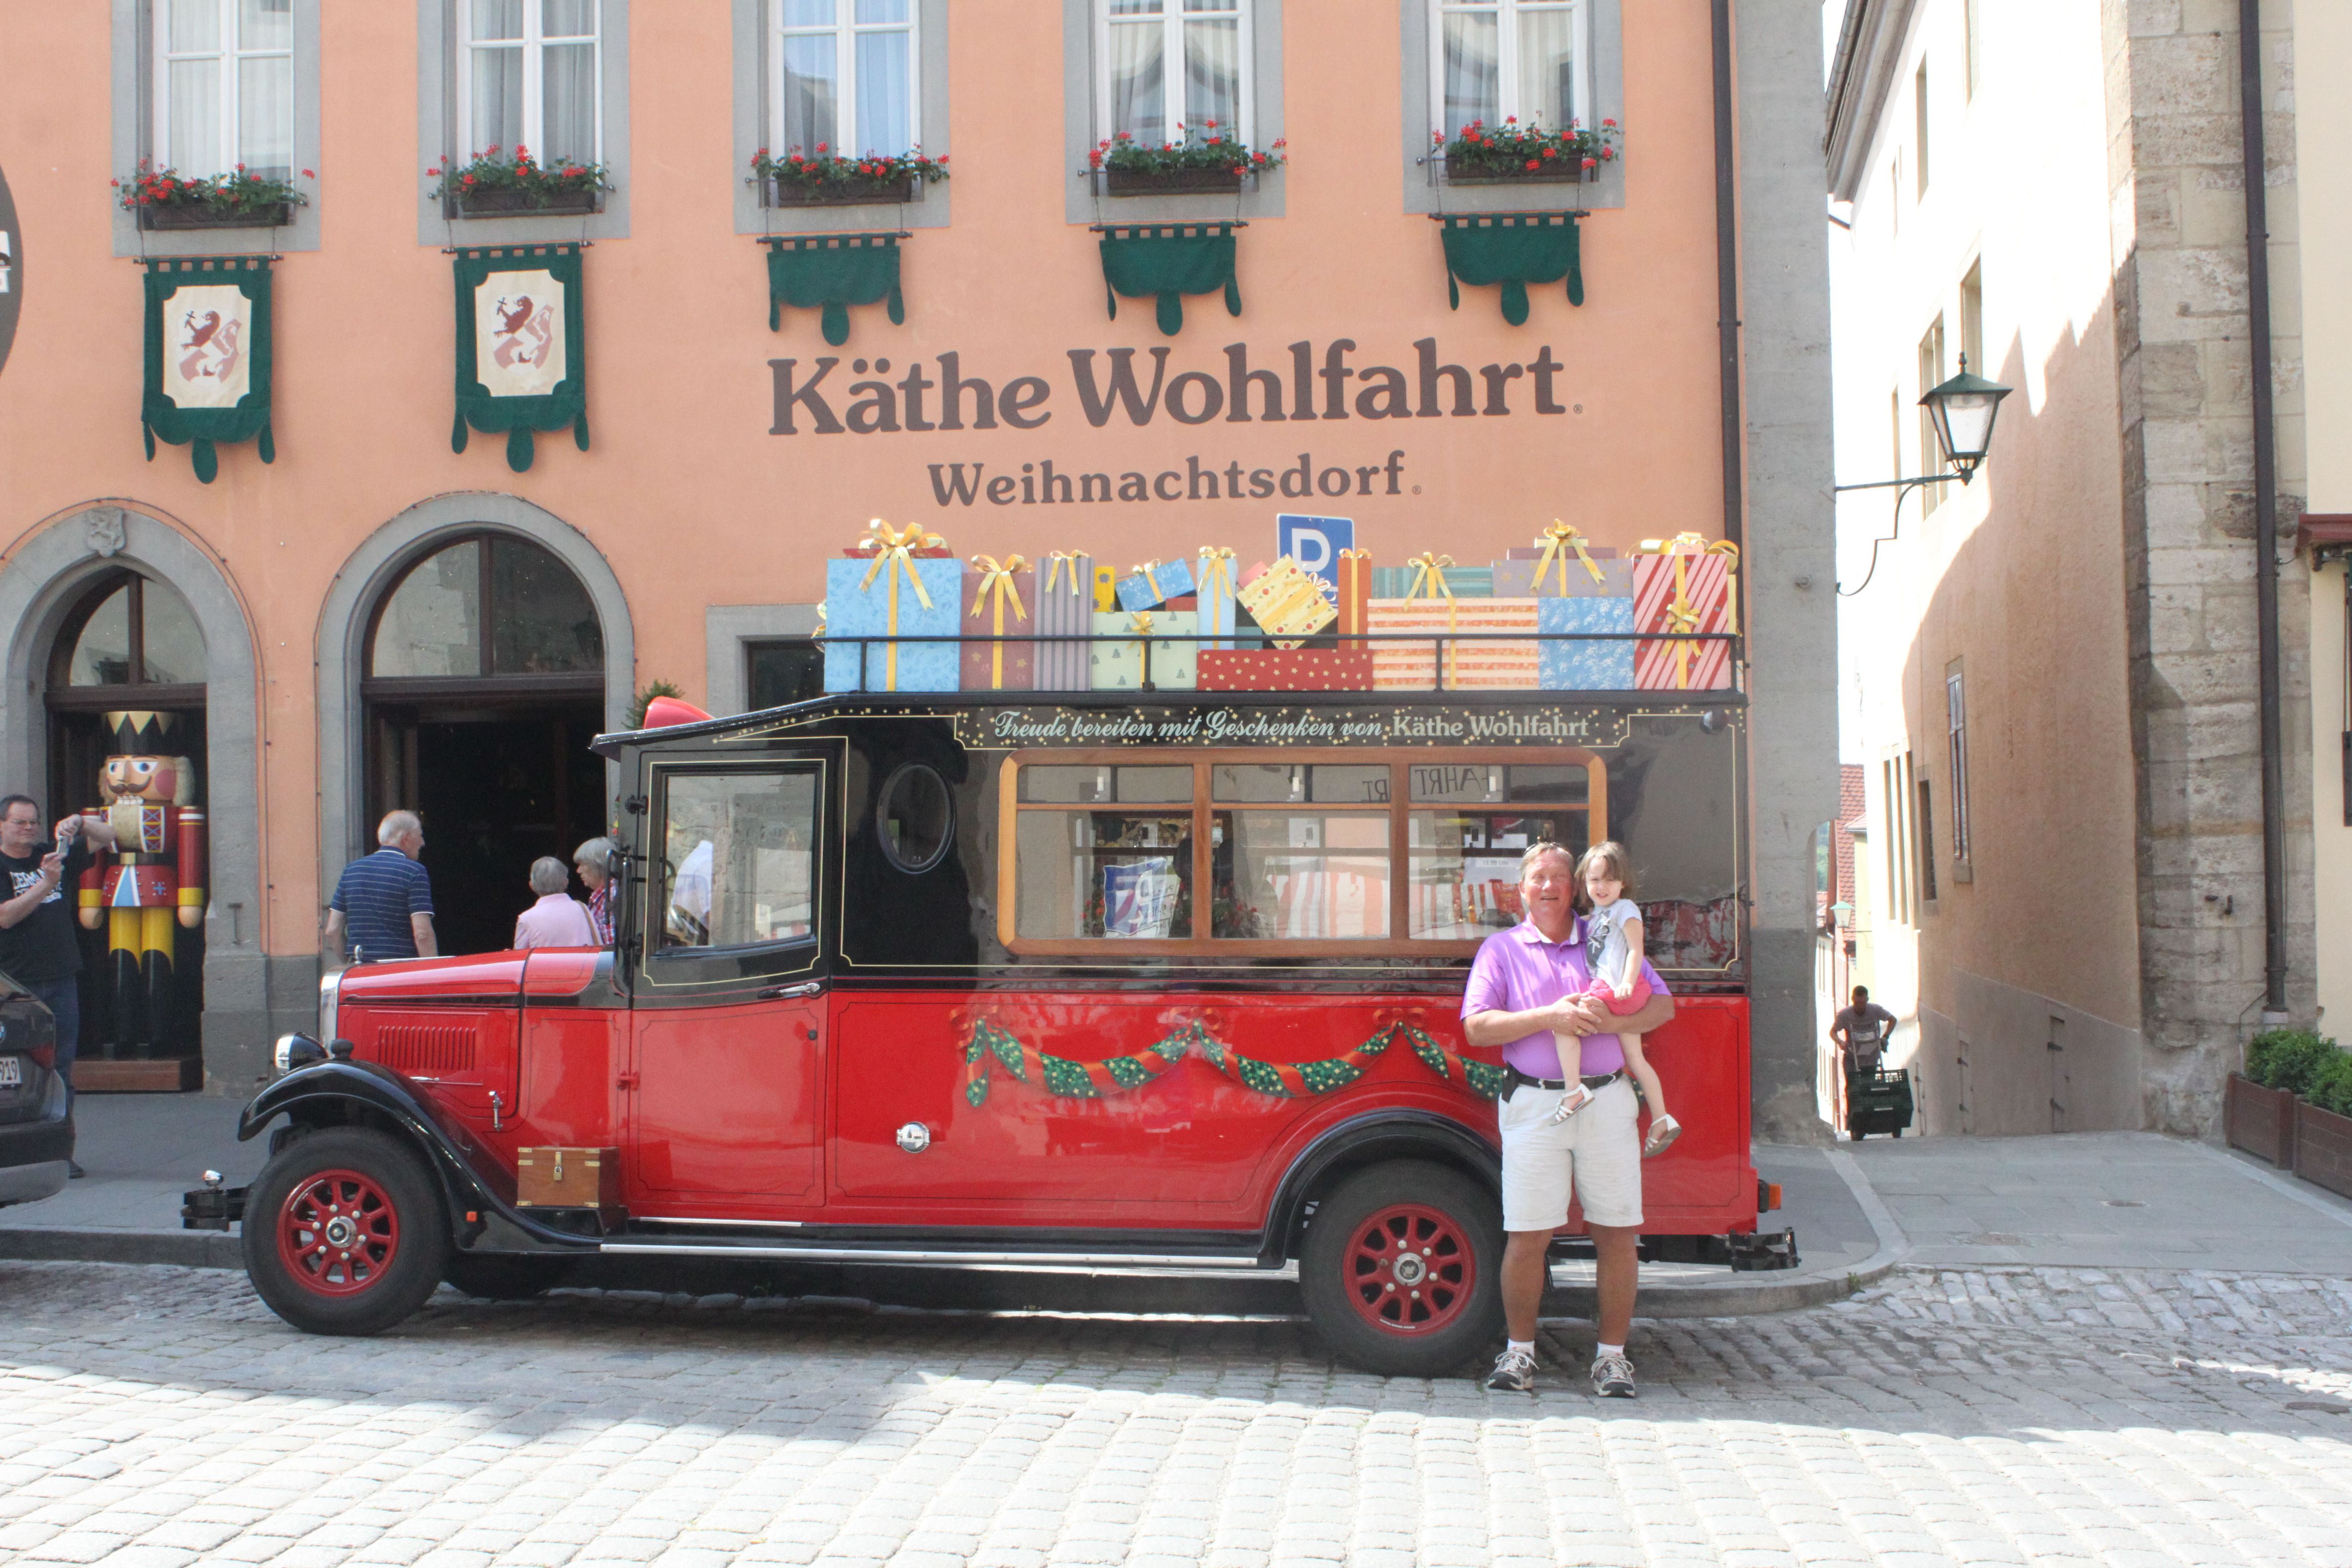 Kathy Wohlfahrt in Rothenburg, Germany | Places & Spaces I've lived ...